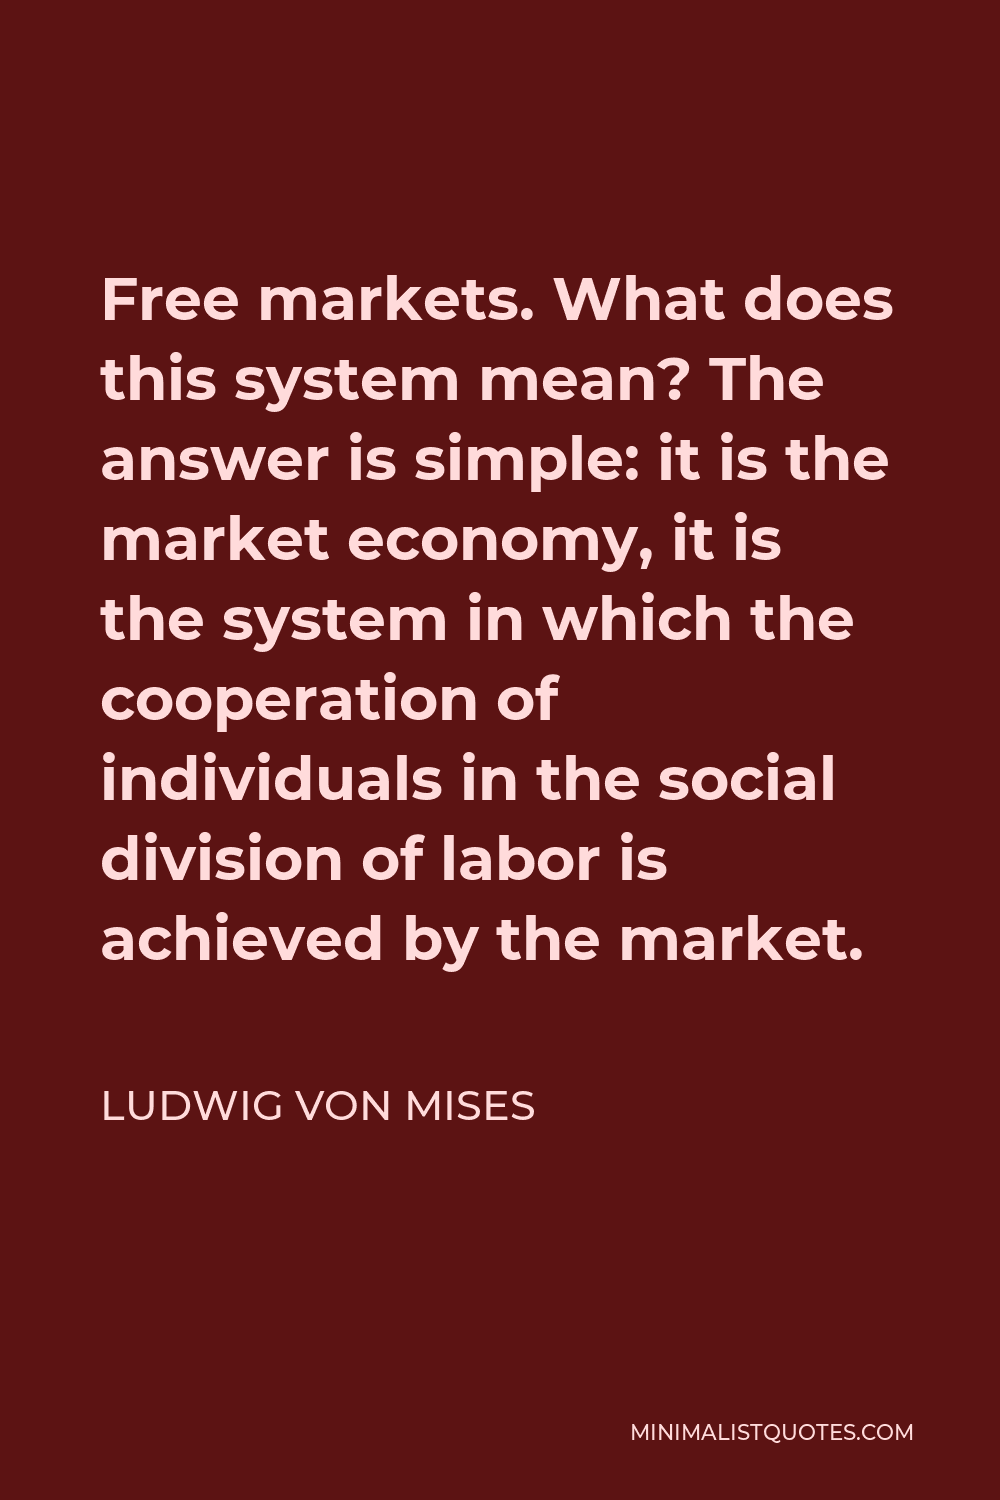 Ludwig von Mises Quote - Free markets. What does this system mean? The answer is simple: it is the market economy, it is the system in which the cooperation of individuals in the social division of labor is achieved by the market.